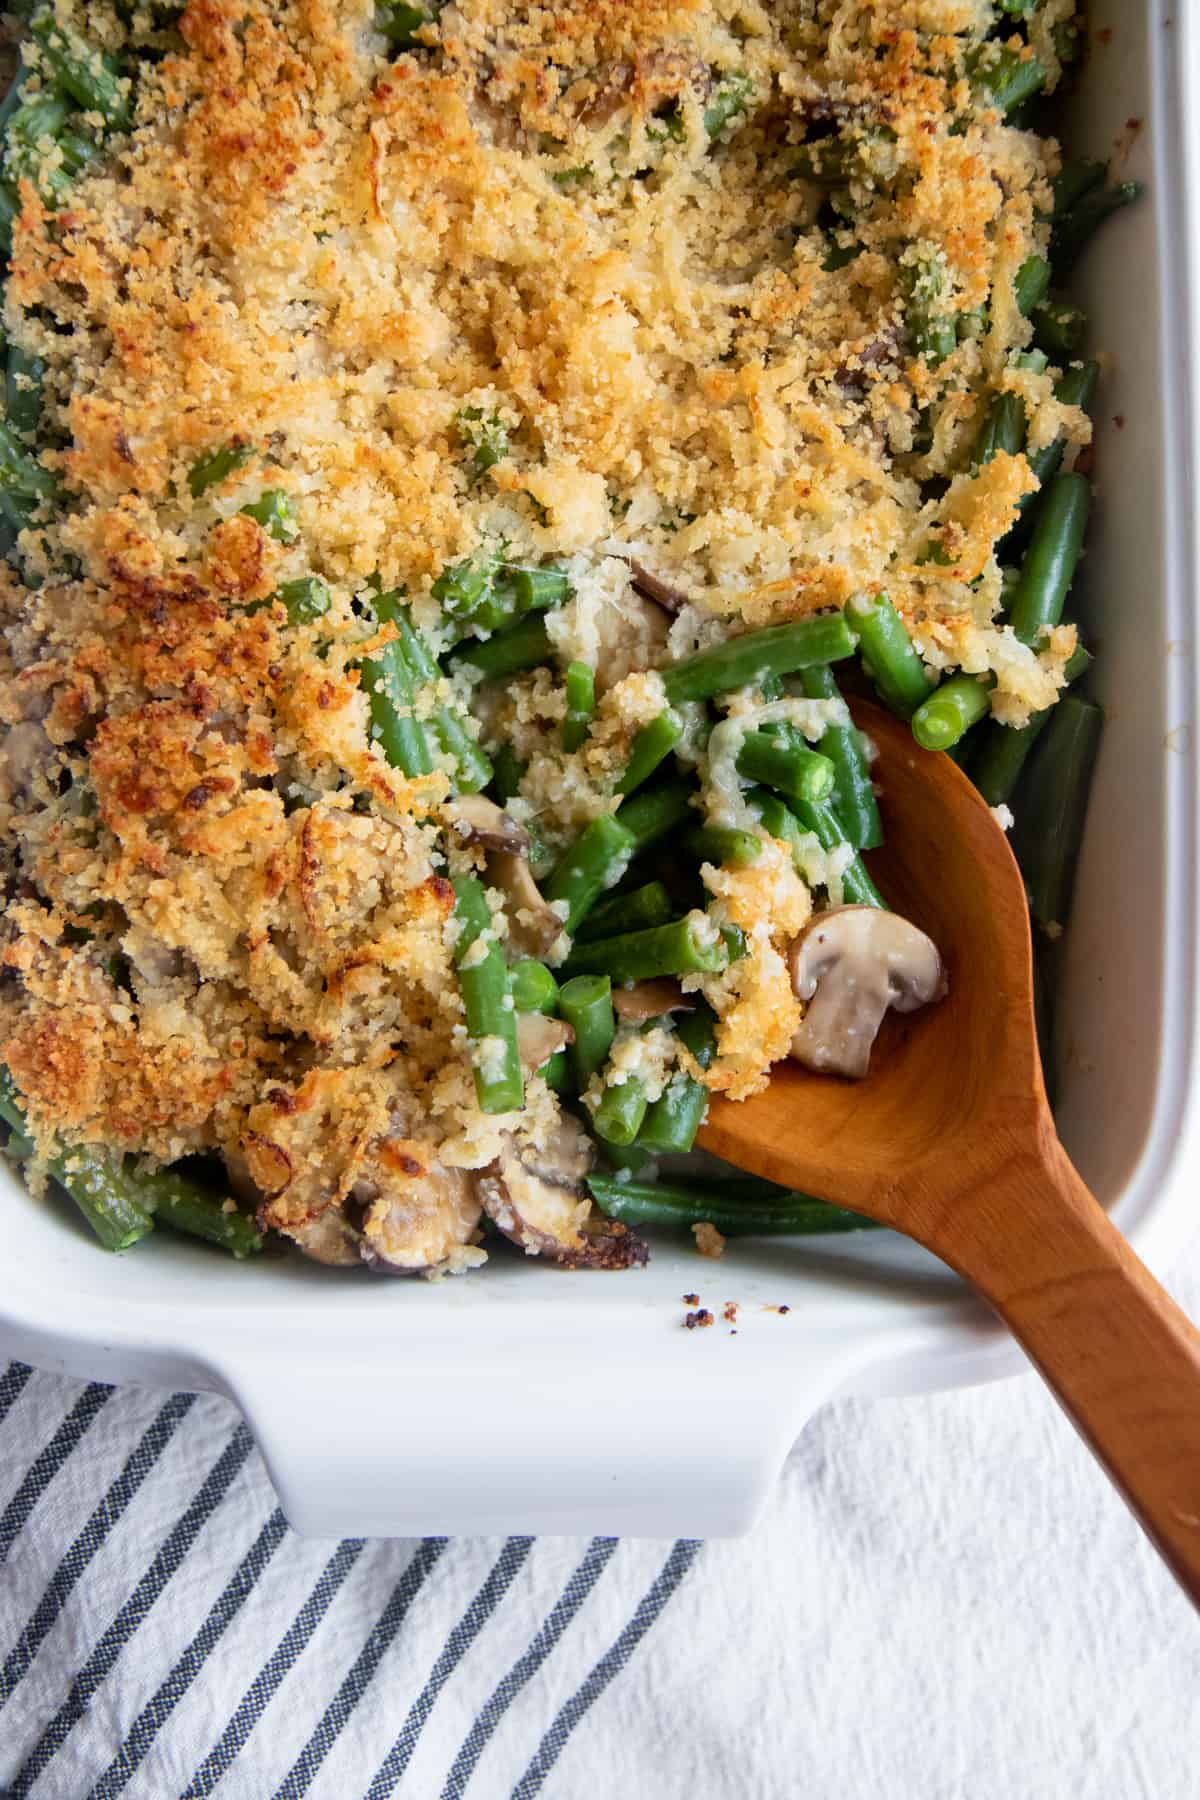 A wooden spoon scoops some fresh green bean casserole out of a white baking dish.